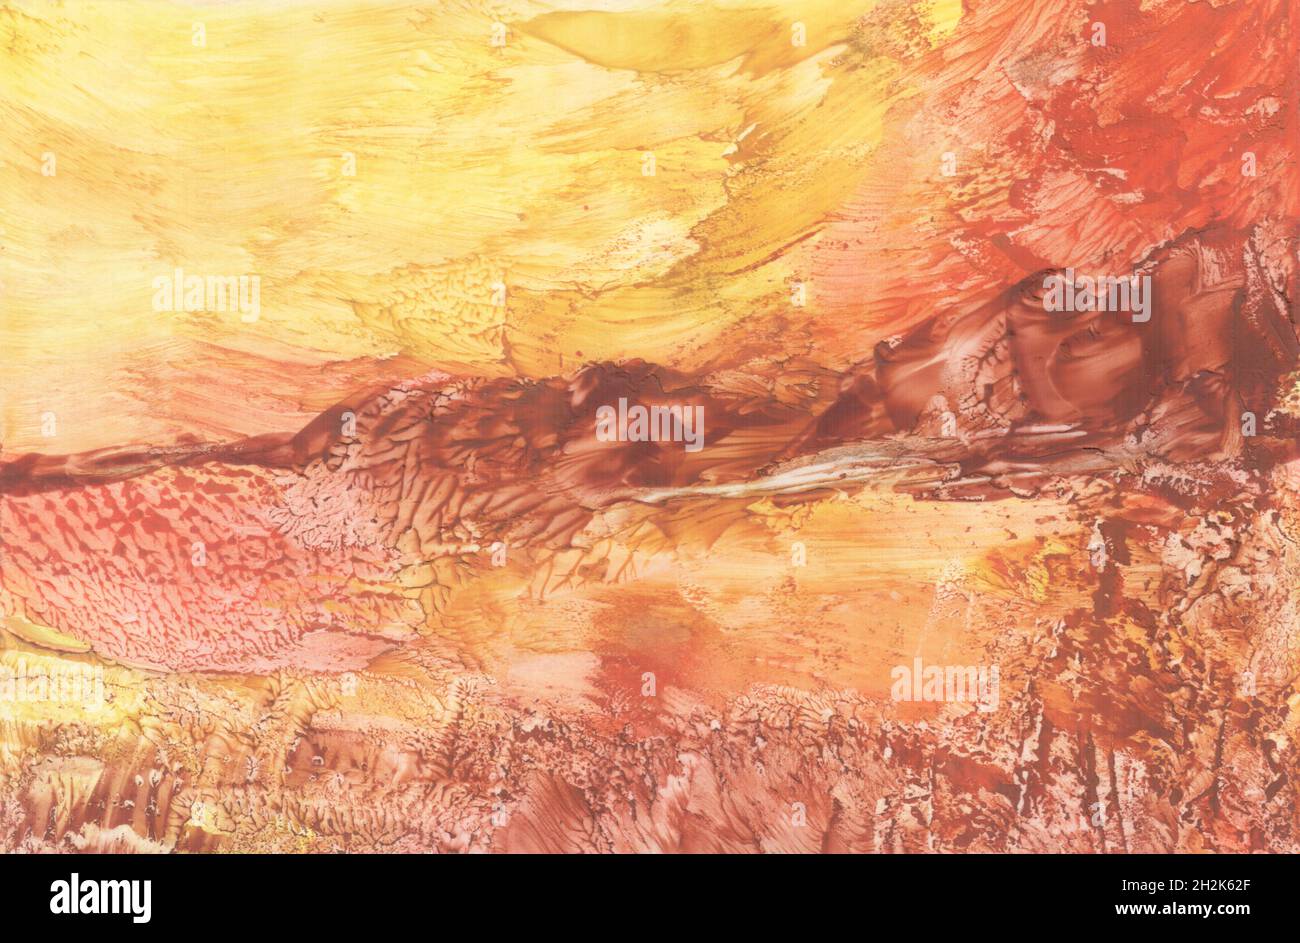 Fantastic abstract landscape. Encaustic wax art hand drawing. Beautiful illustration, waxy background Stock Photo